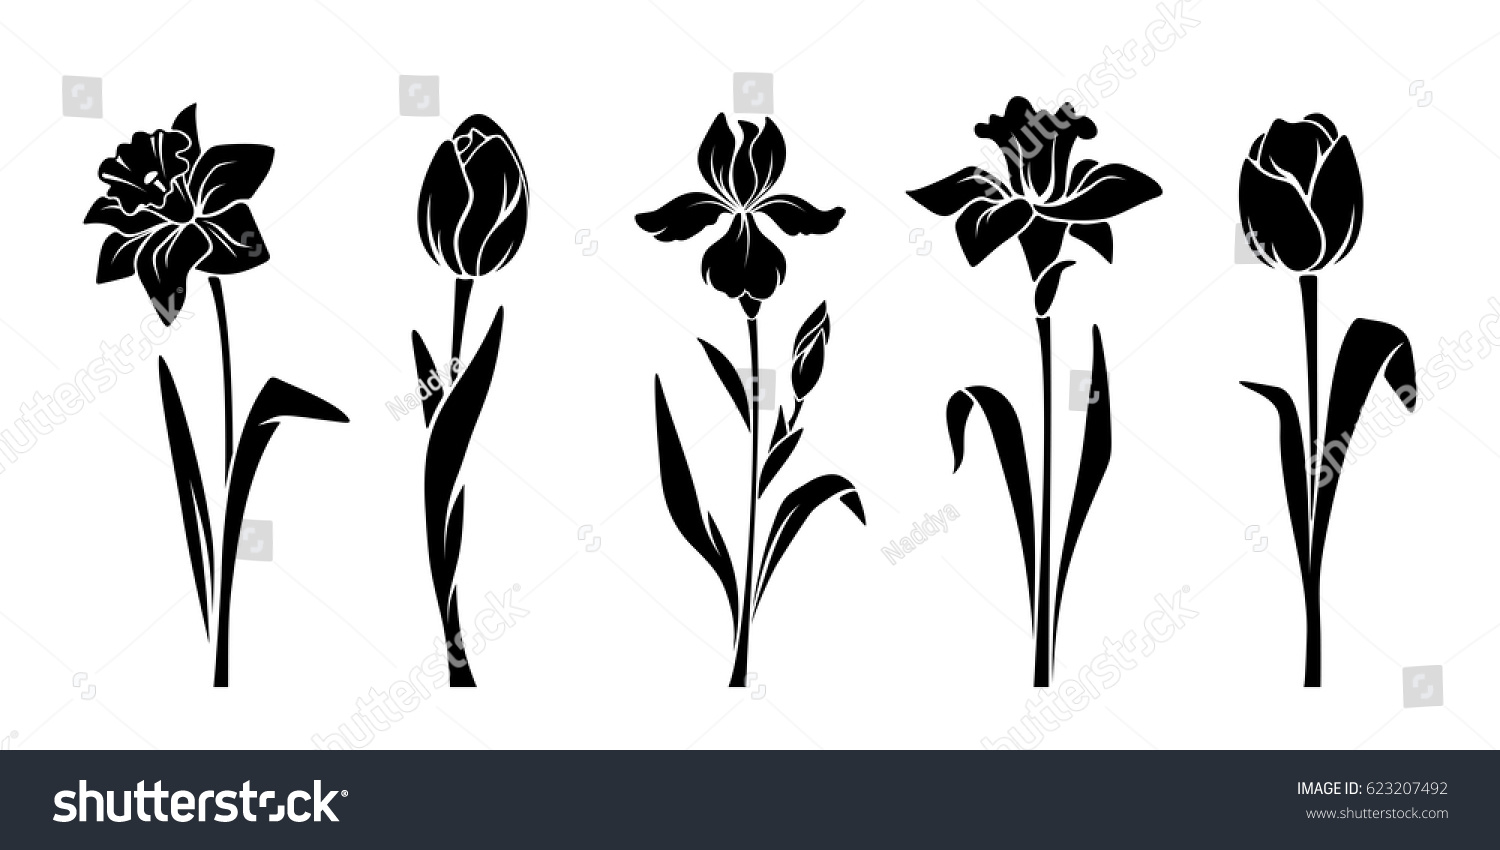 SVG of Vector black silhouettes of spring flowers (tulips, narcissus and iris) isolated on a white background. svg